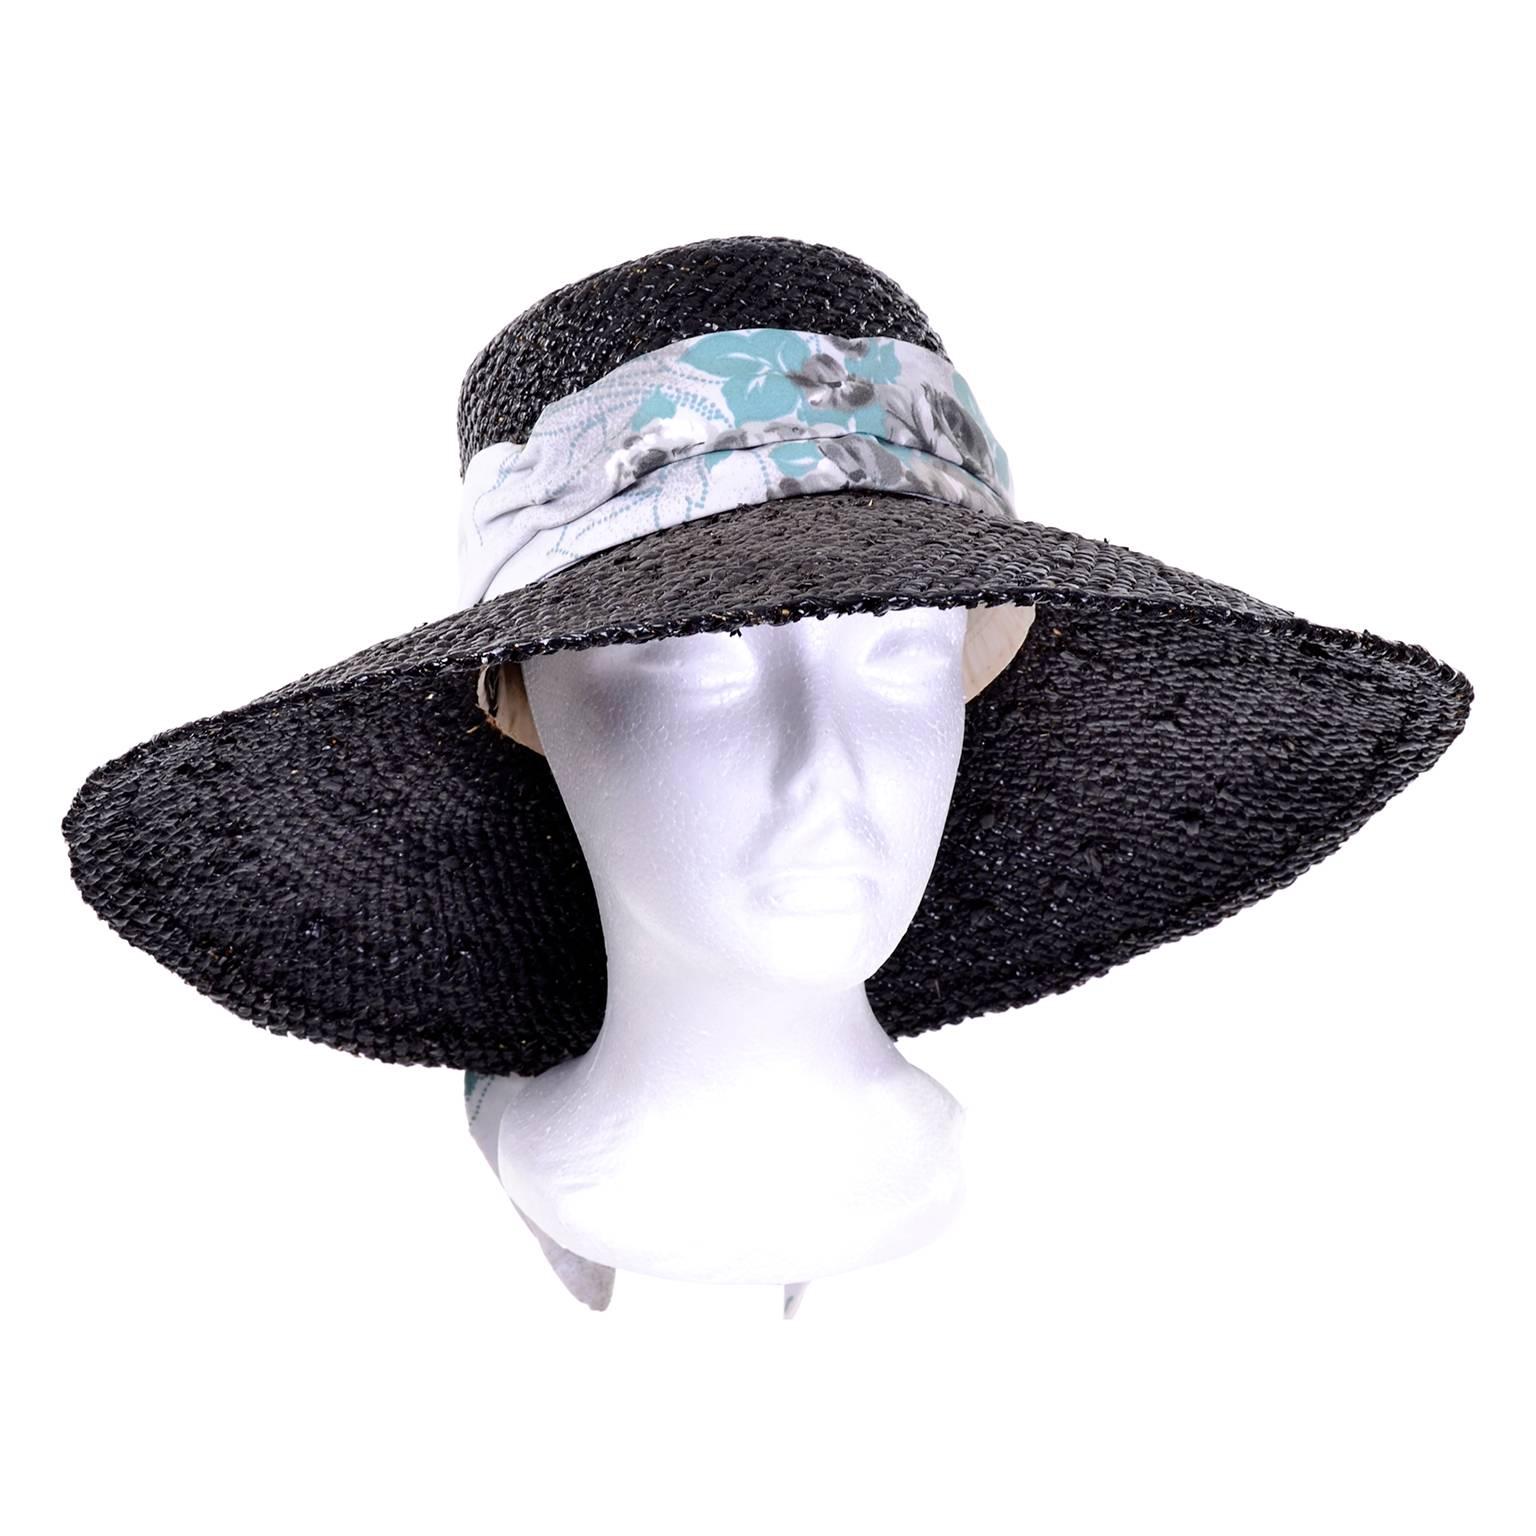 Mr Blackwell Rare Mid Century Vintage Painted Black Straw Wide Brim Hat In Excellent Condition For Sale In Portland, OR